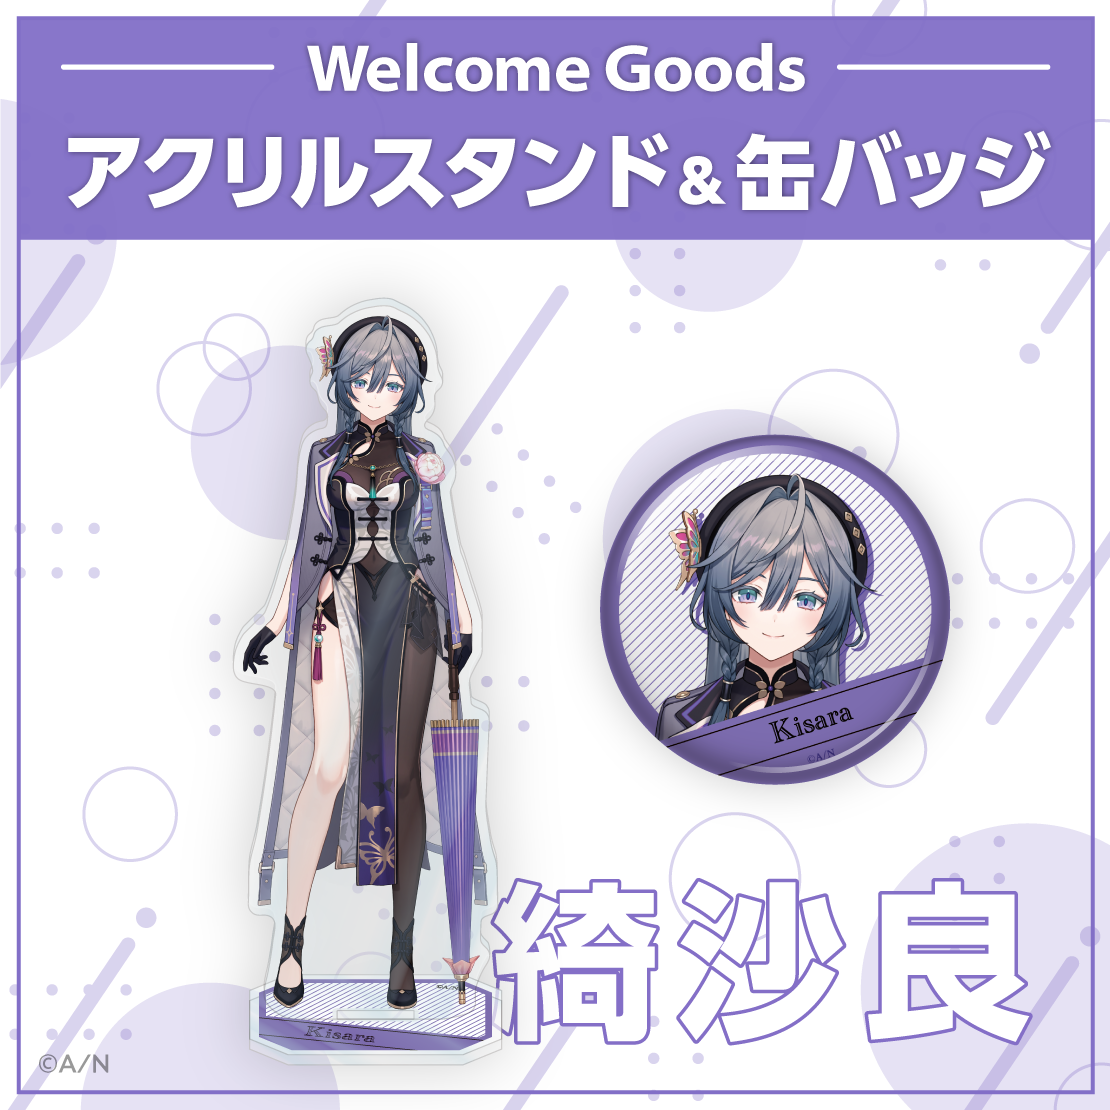 【Welcome Goods】綺沙良